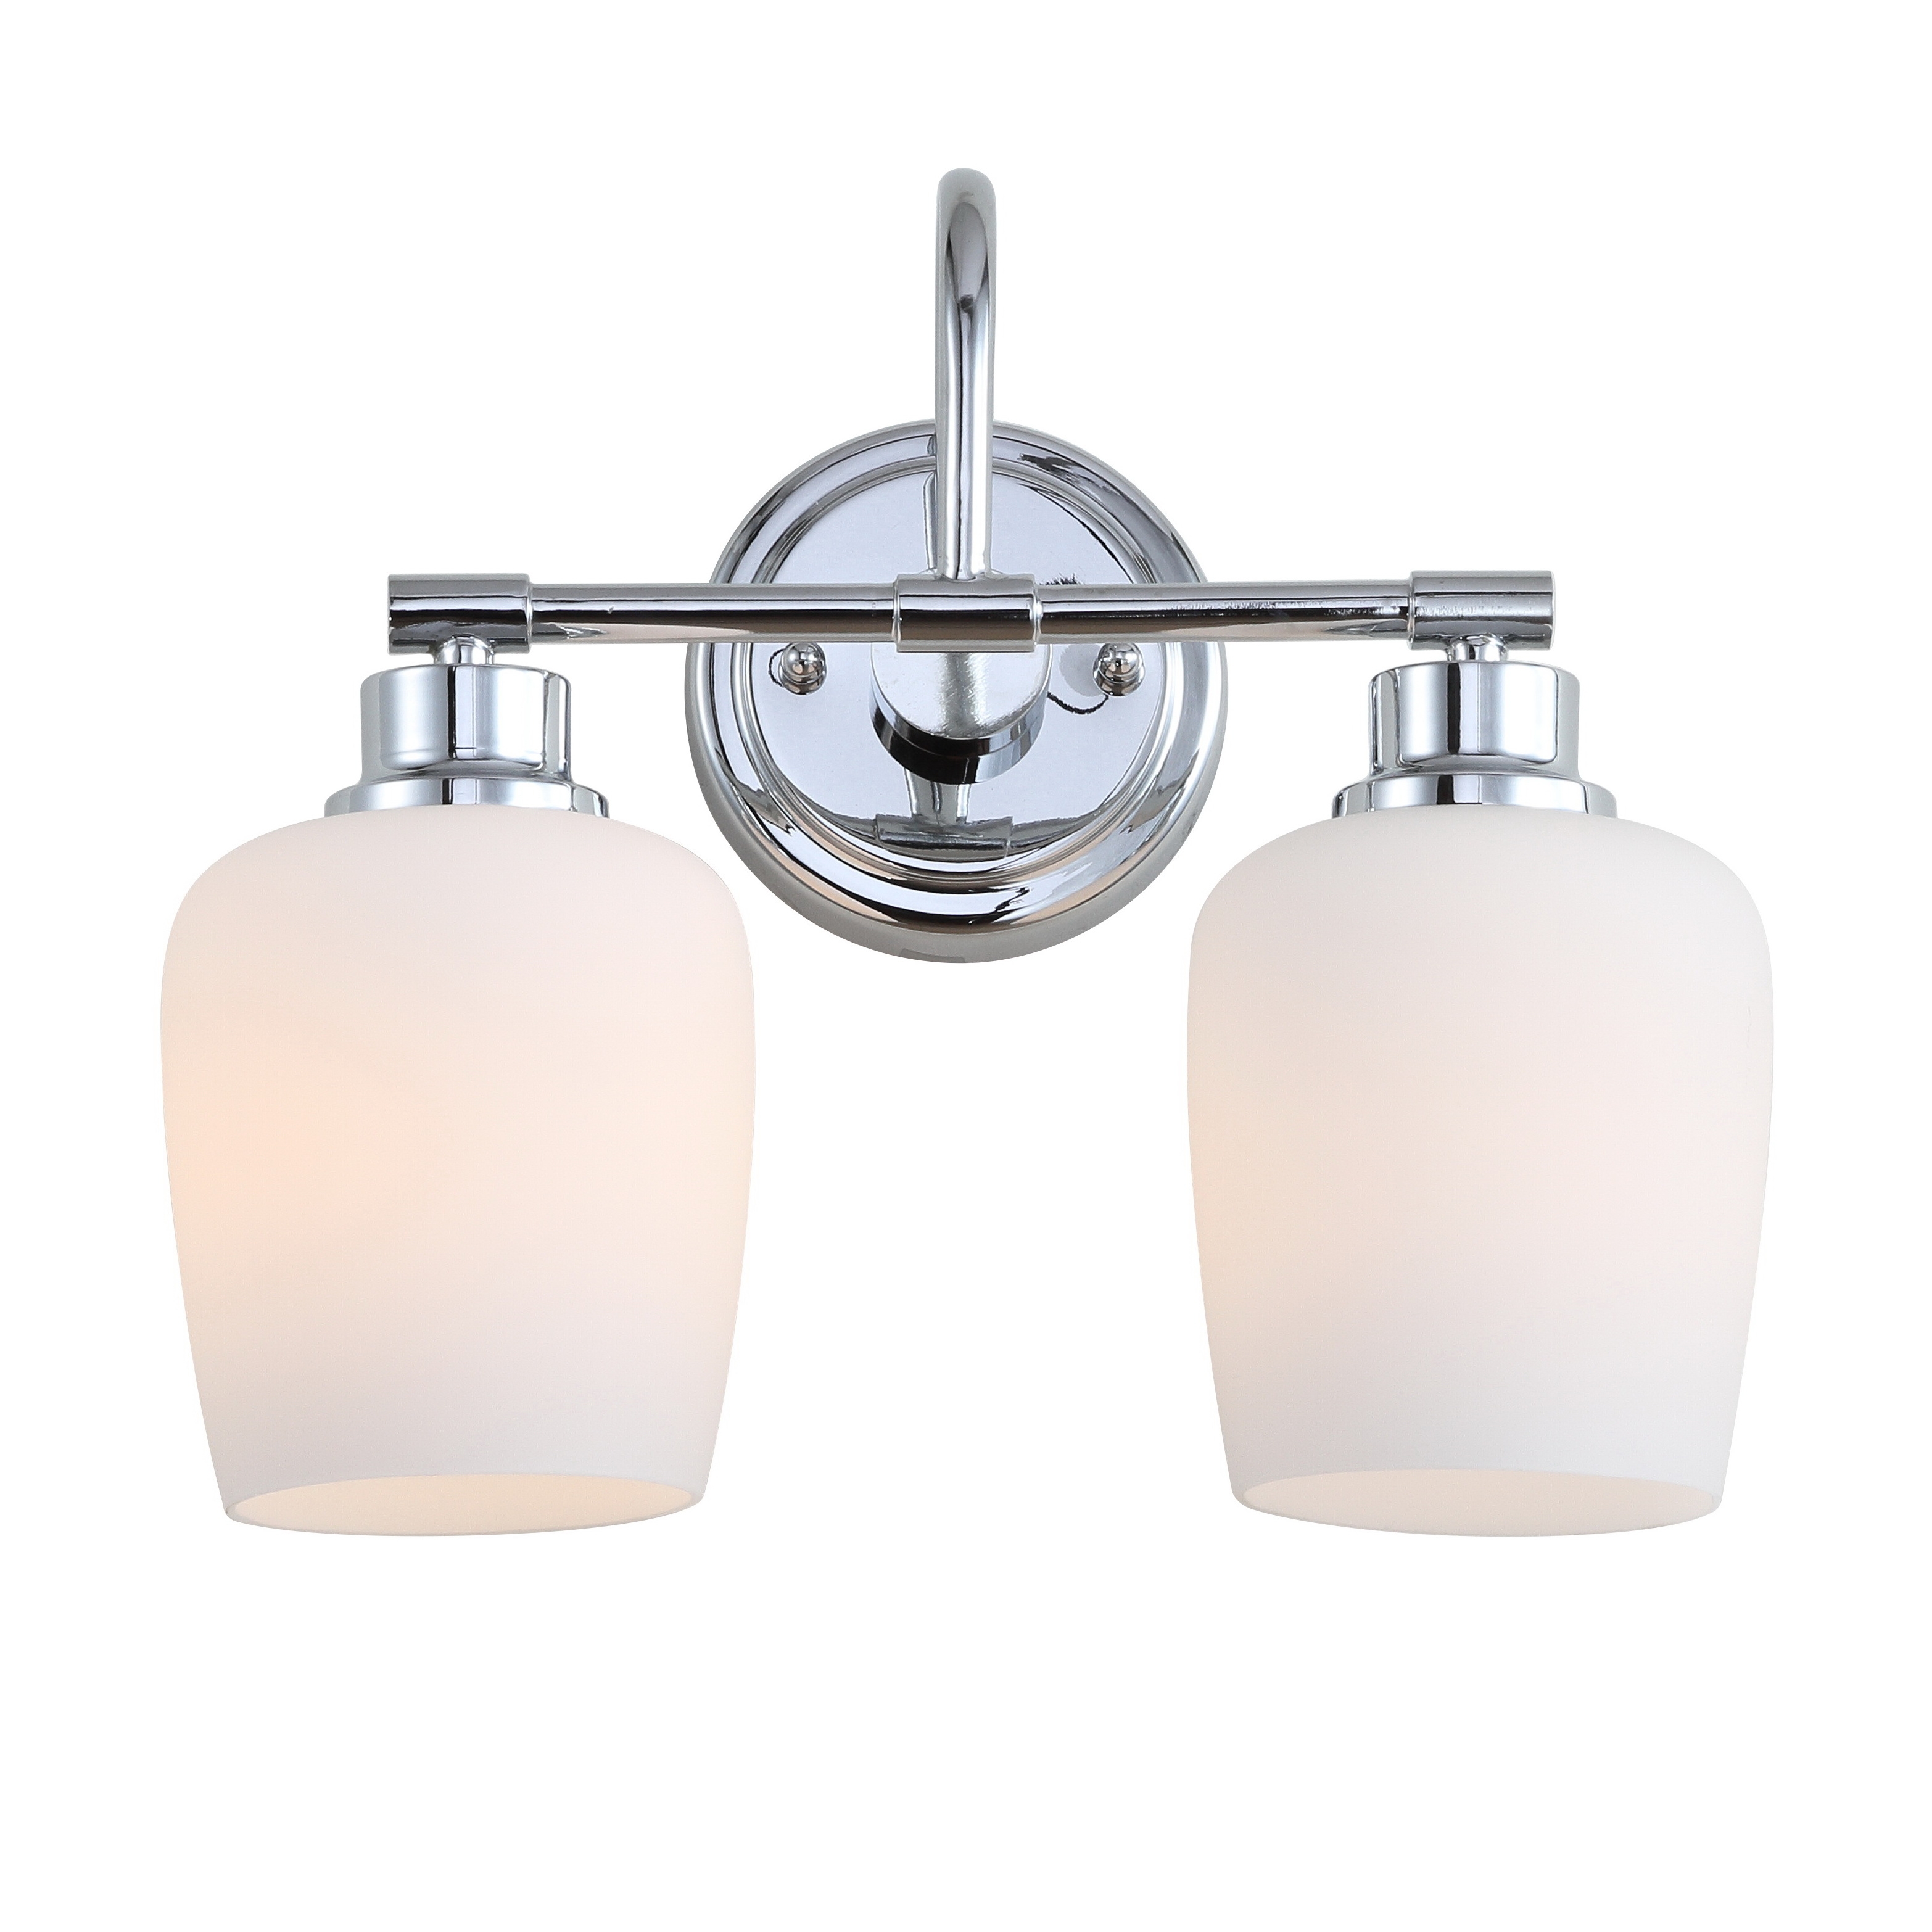 Rayden Two Light Bathroom Sconce - Iron/White Frosted Glass - Arlo Home - Image 1